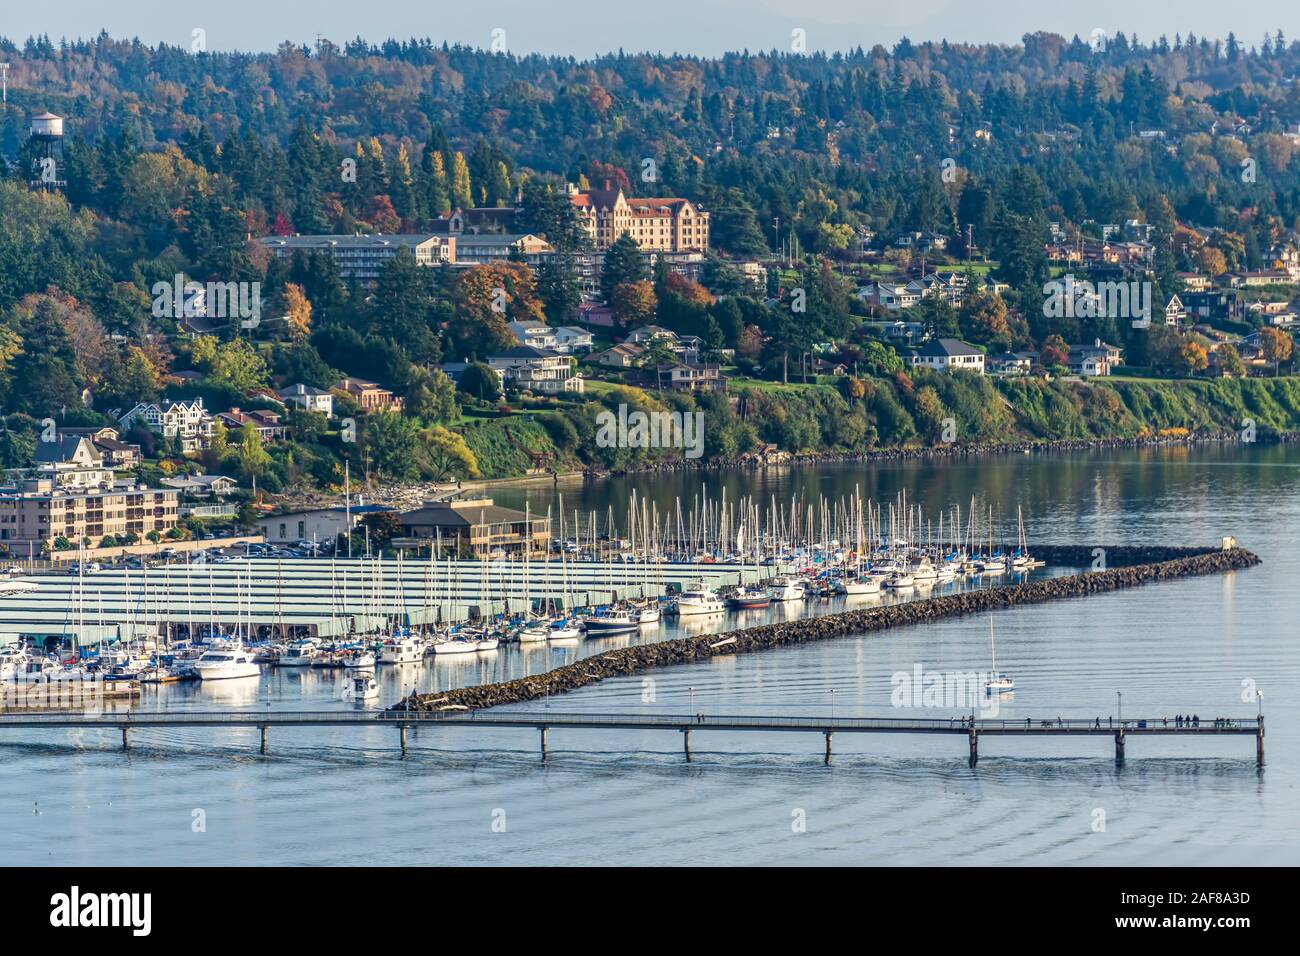 A view of the waterfron and marina in Des Moines, Washington. Stock Photo